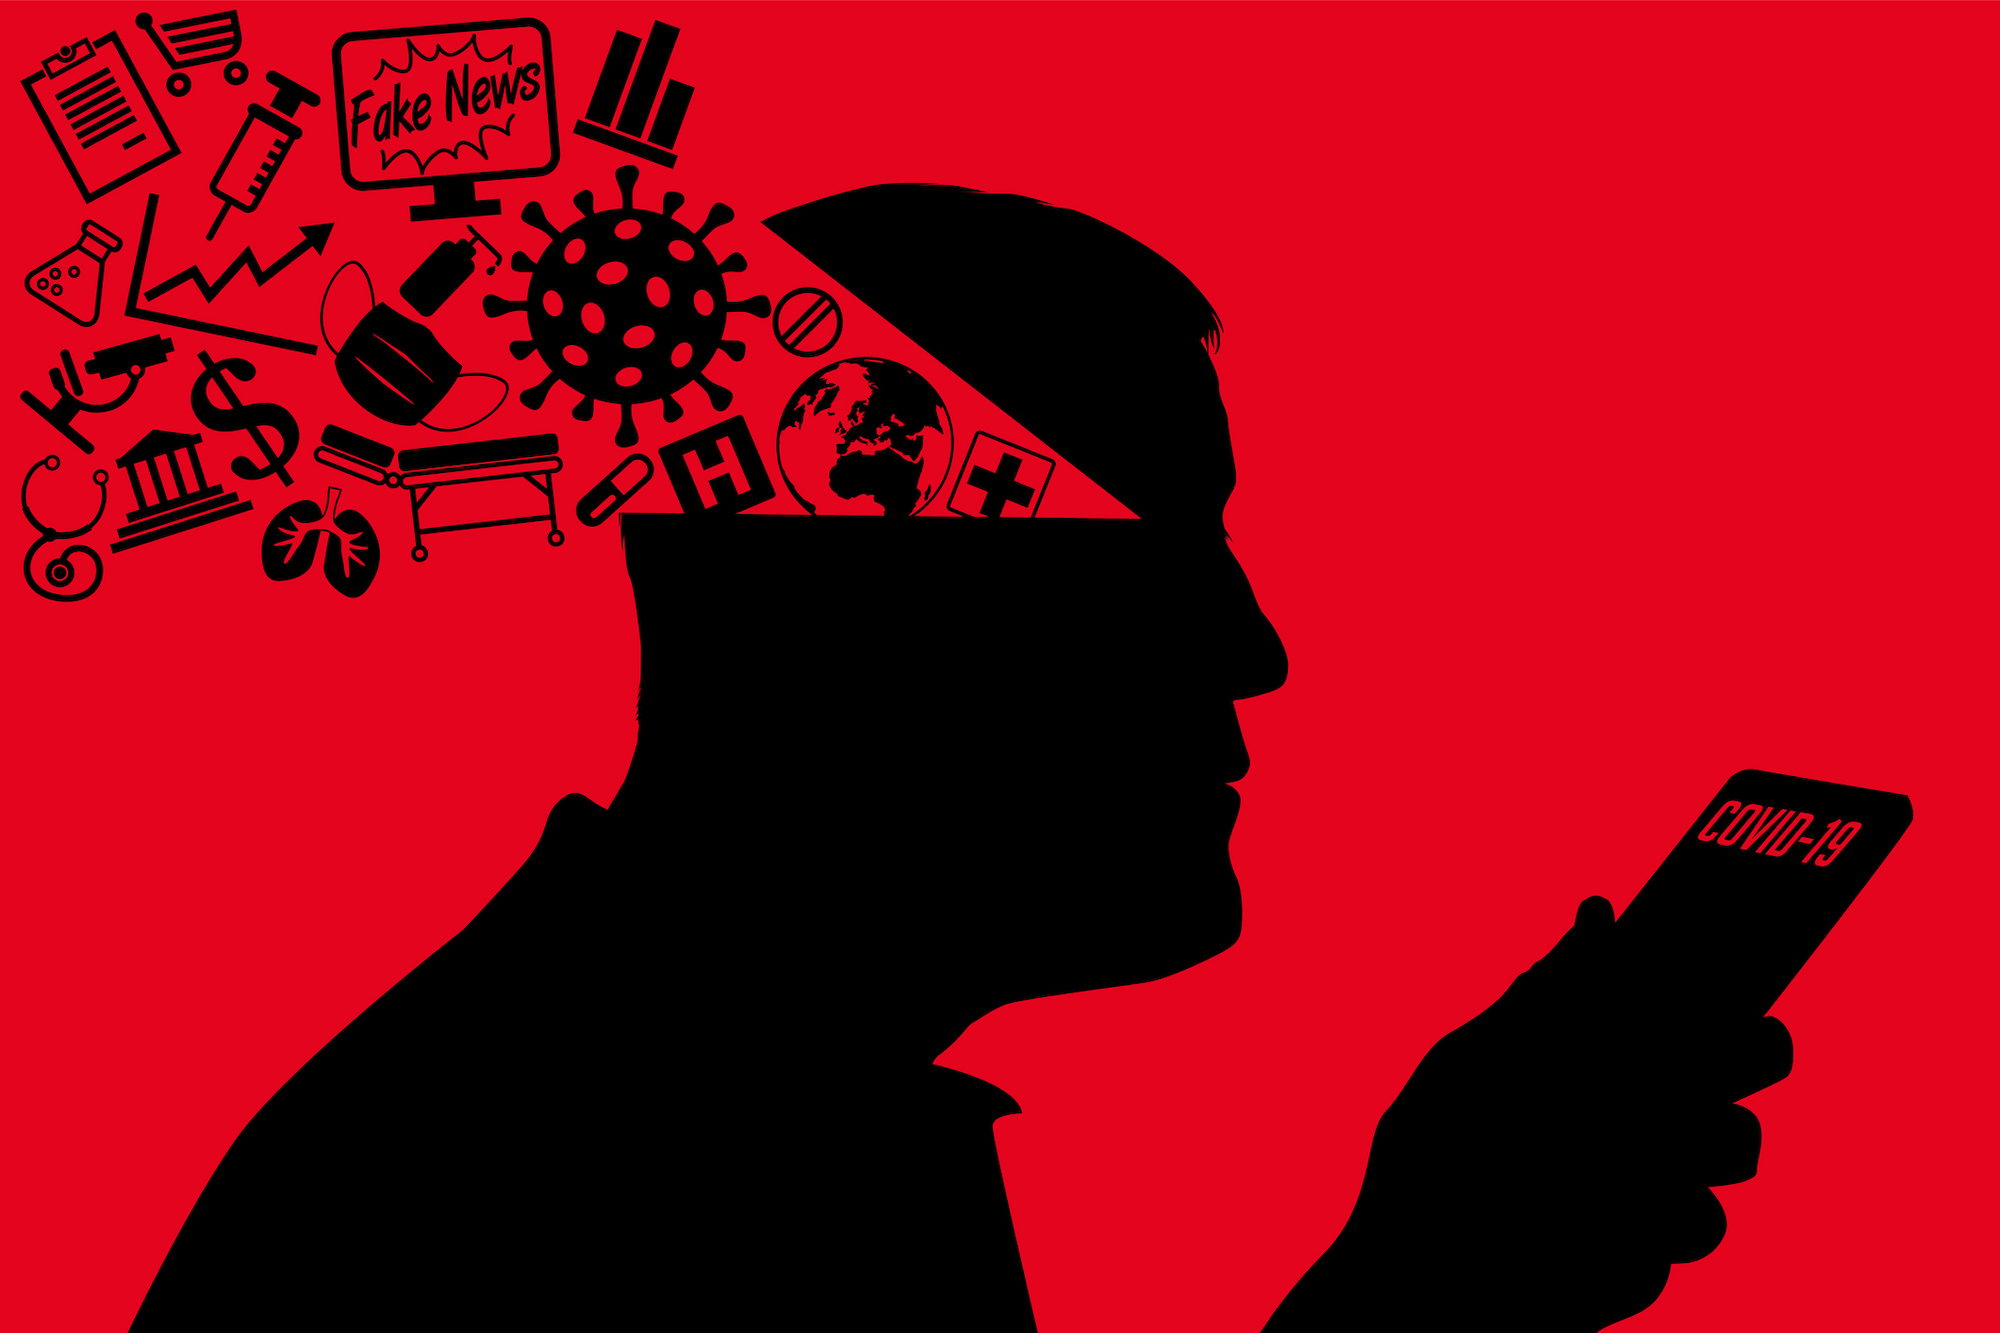 A silhouette of a person in black on a red background. The person is holding a phone that reads "COVID-19" and the back of the head is open, with many different symbols flowing out, including a globe, a hospital, a needle, a vial, a mask, the dollar sign, and a TV screen that reads "Fake News."